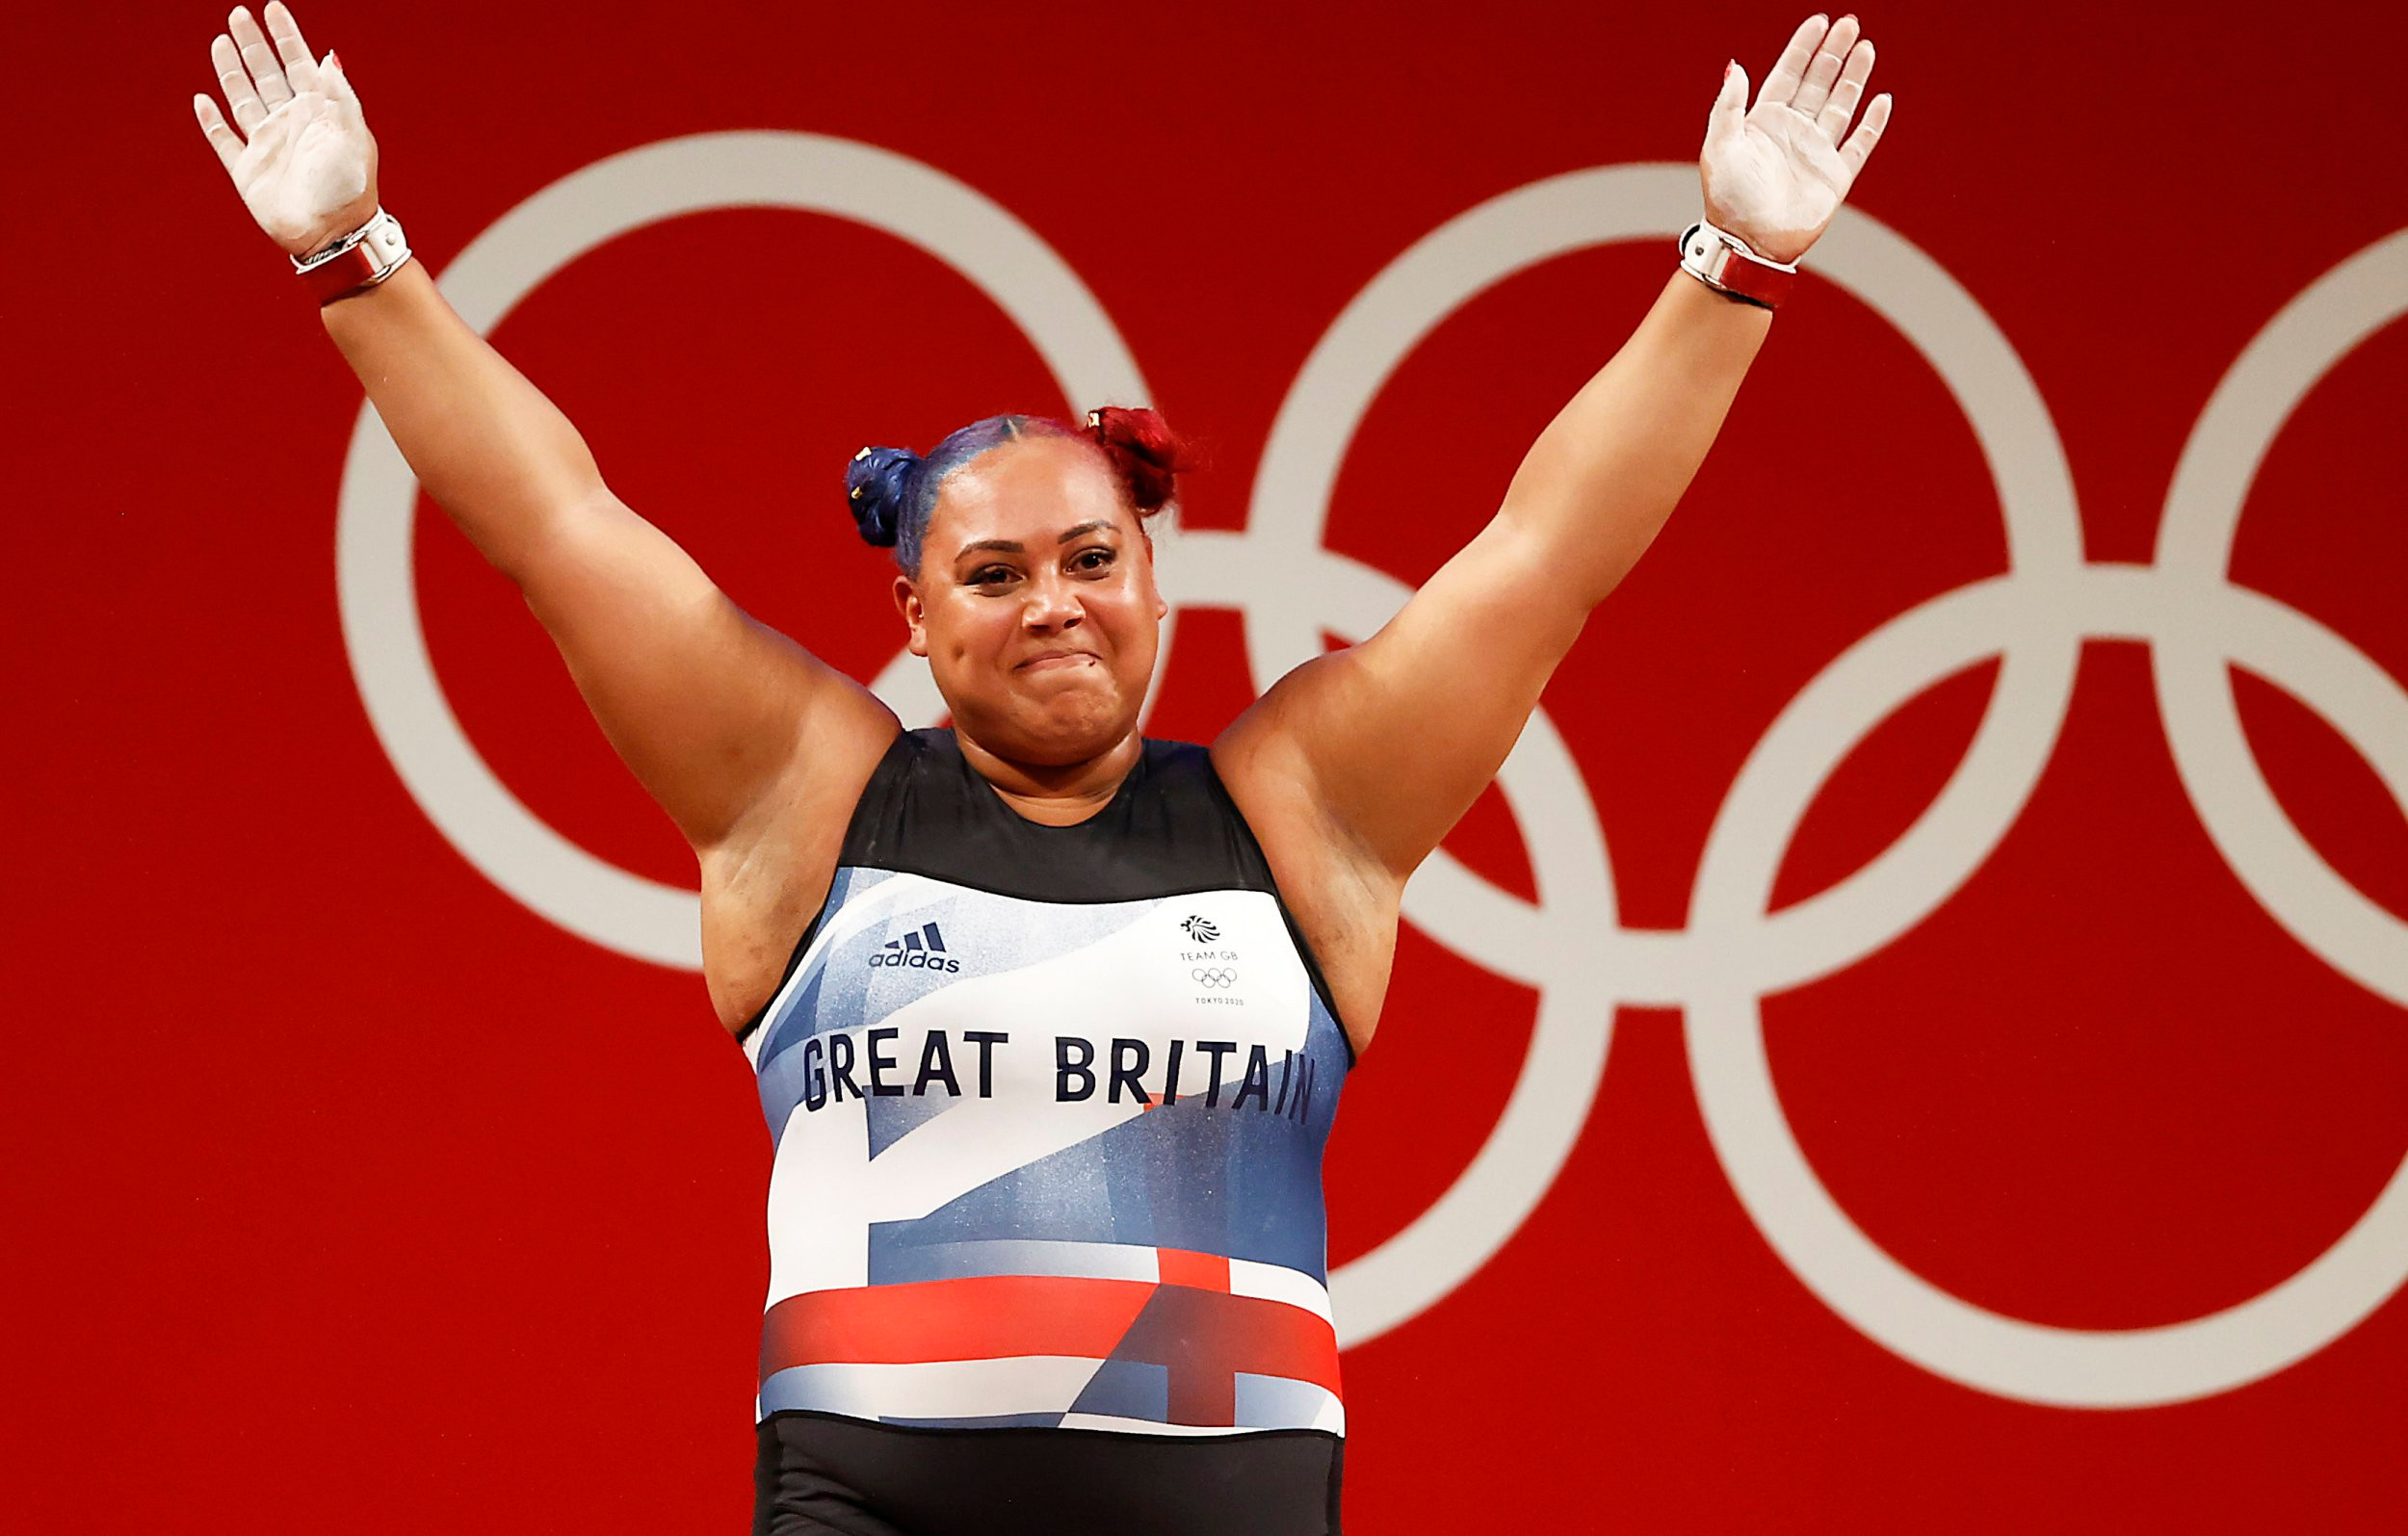 Tokyo Olympics: Emily Campbell wins silver for Team GB in women’s weightlifting